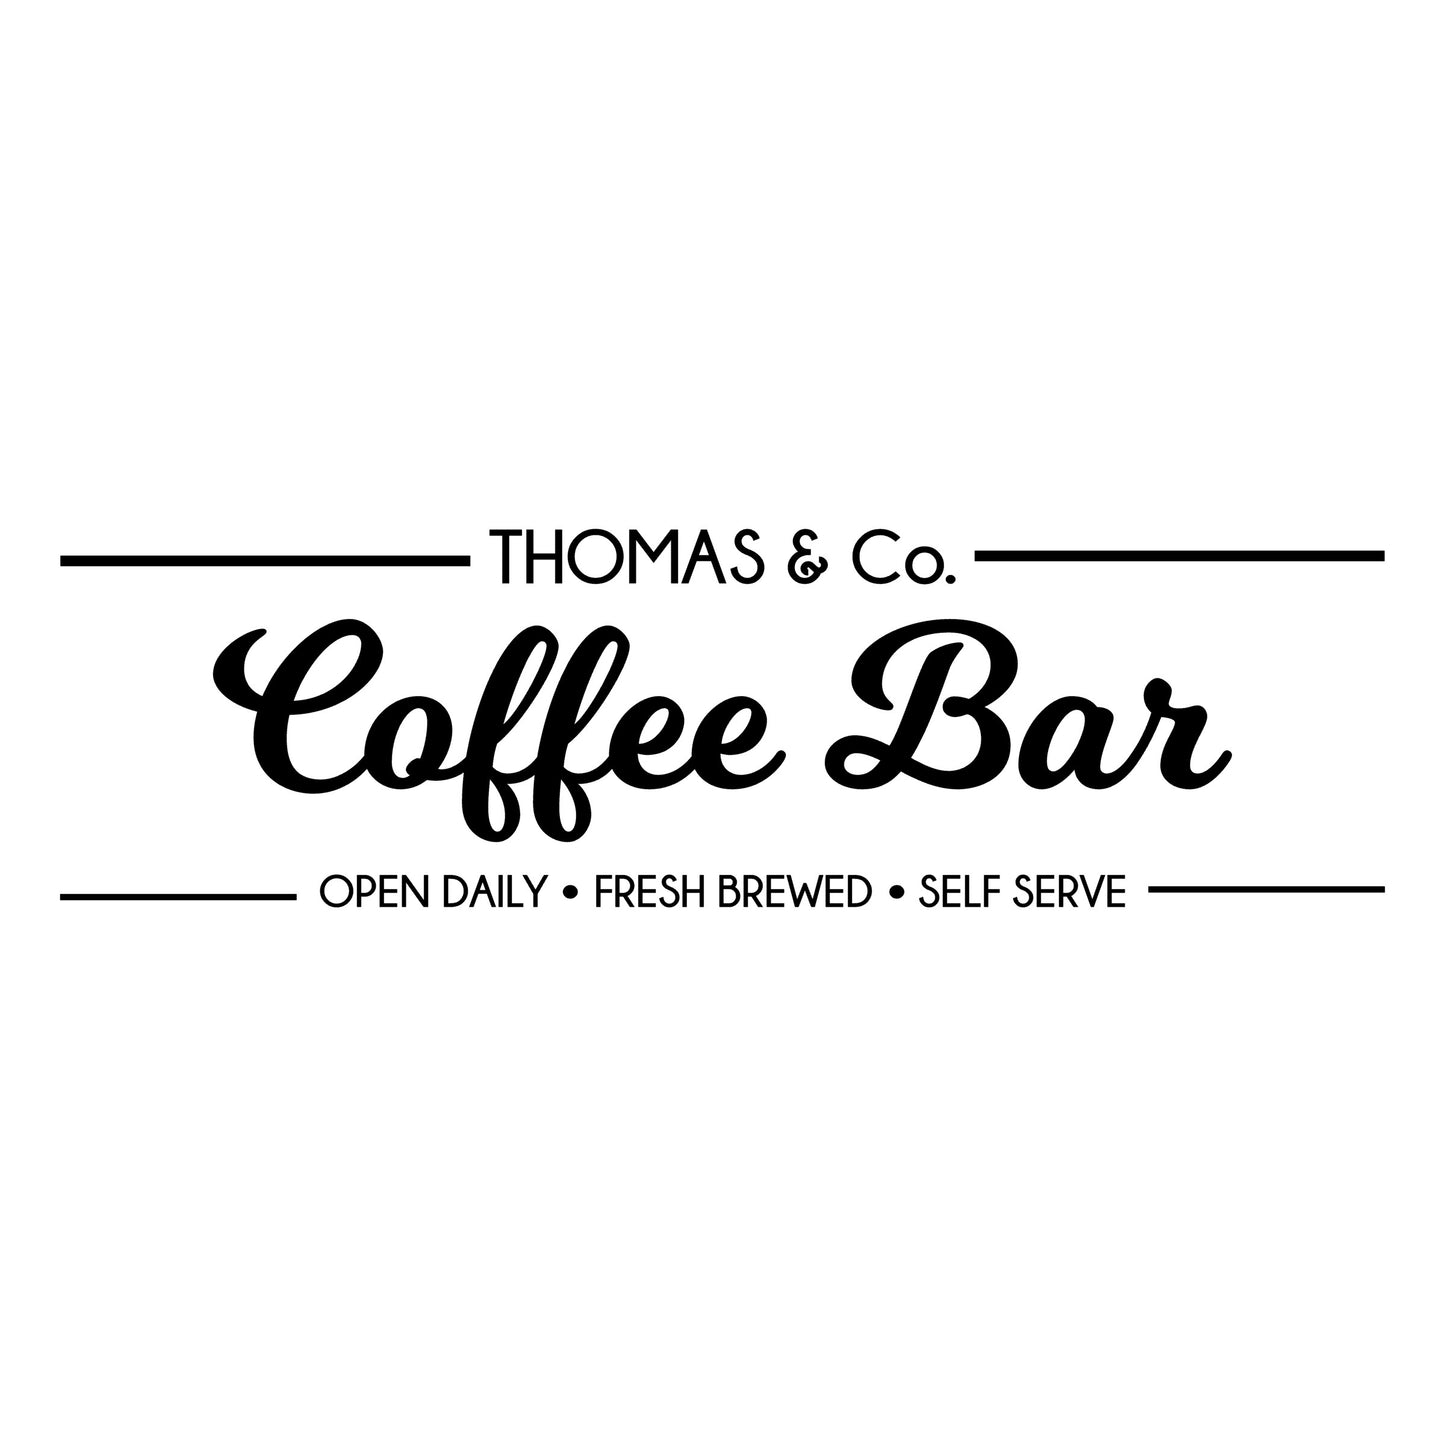 Coffee Bar Decal Sign, Personalized - Gift Decor for Coffee Lover